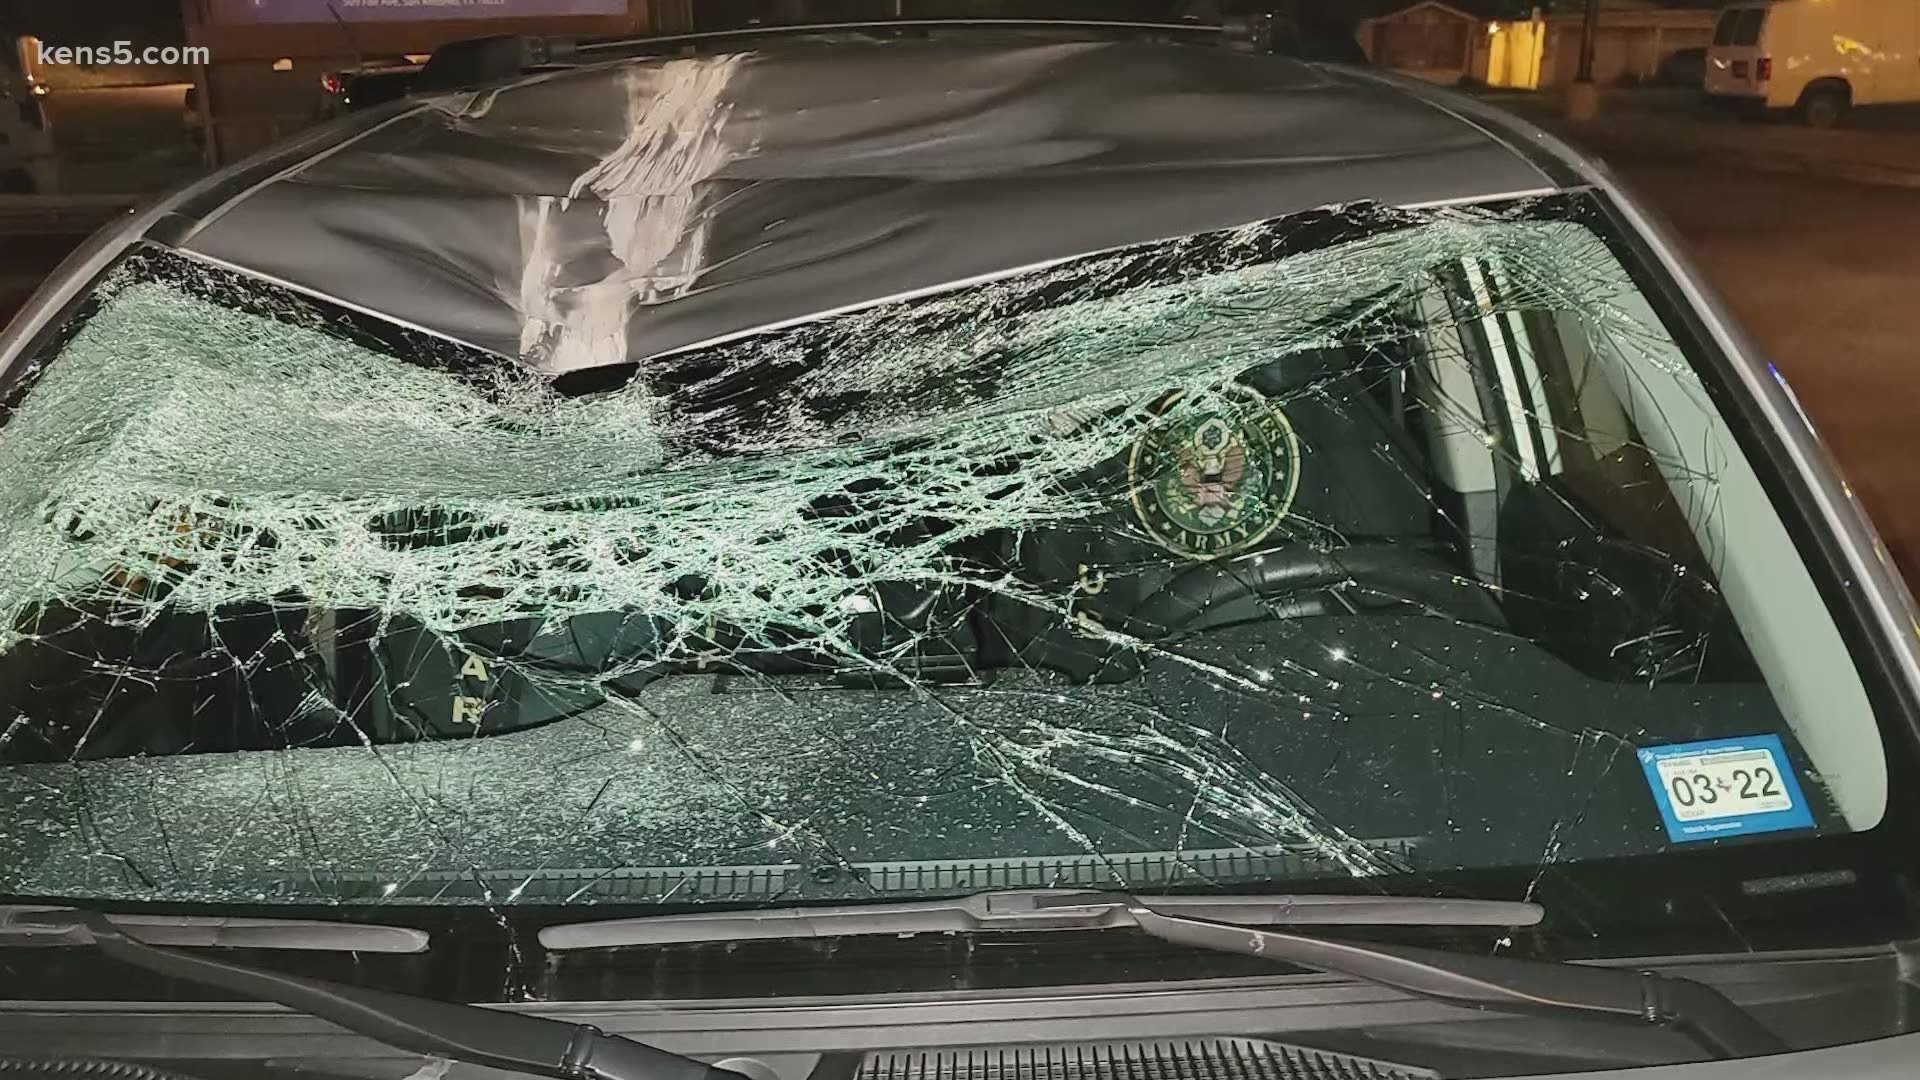 Car collides with microwave thrown from St. John's overpass late